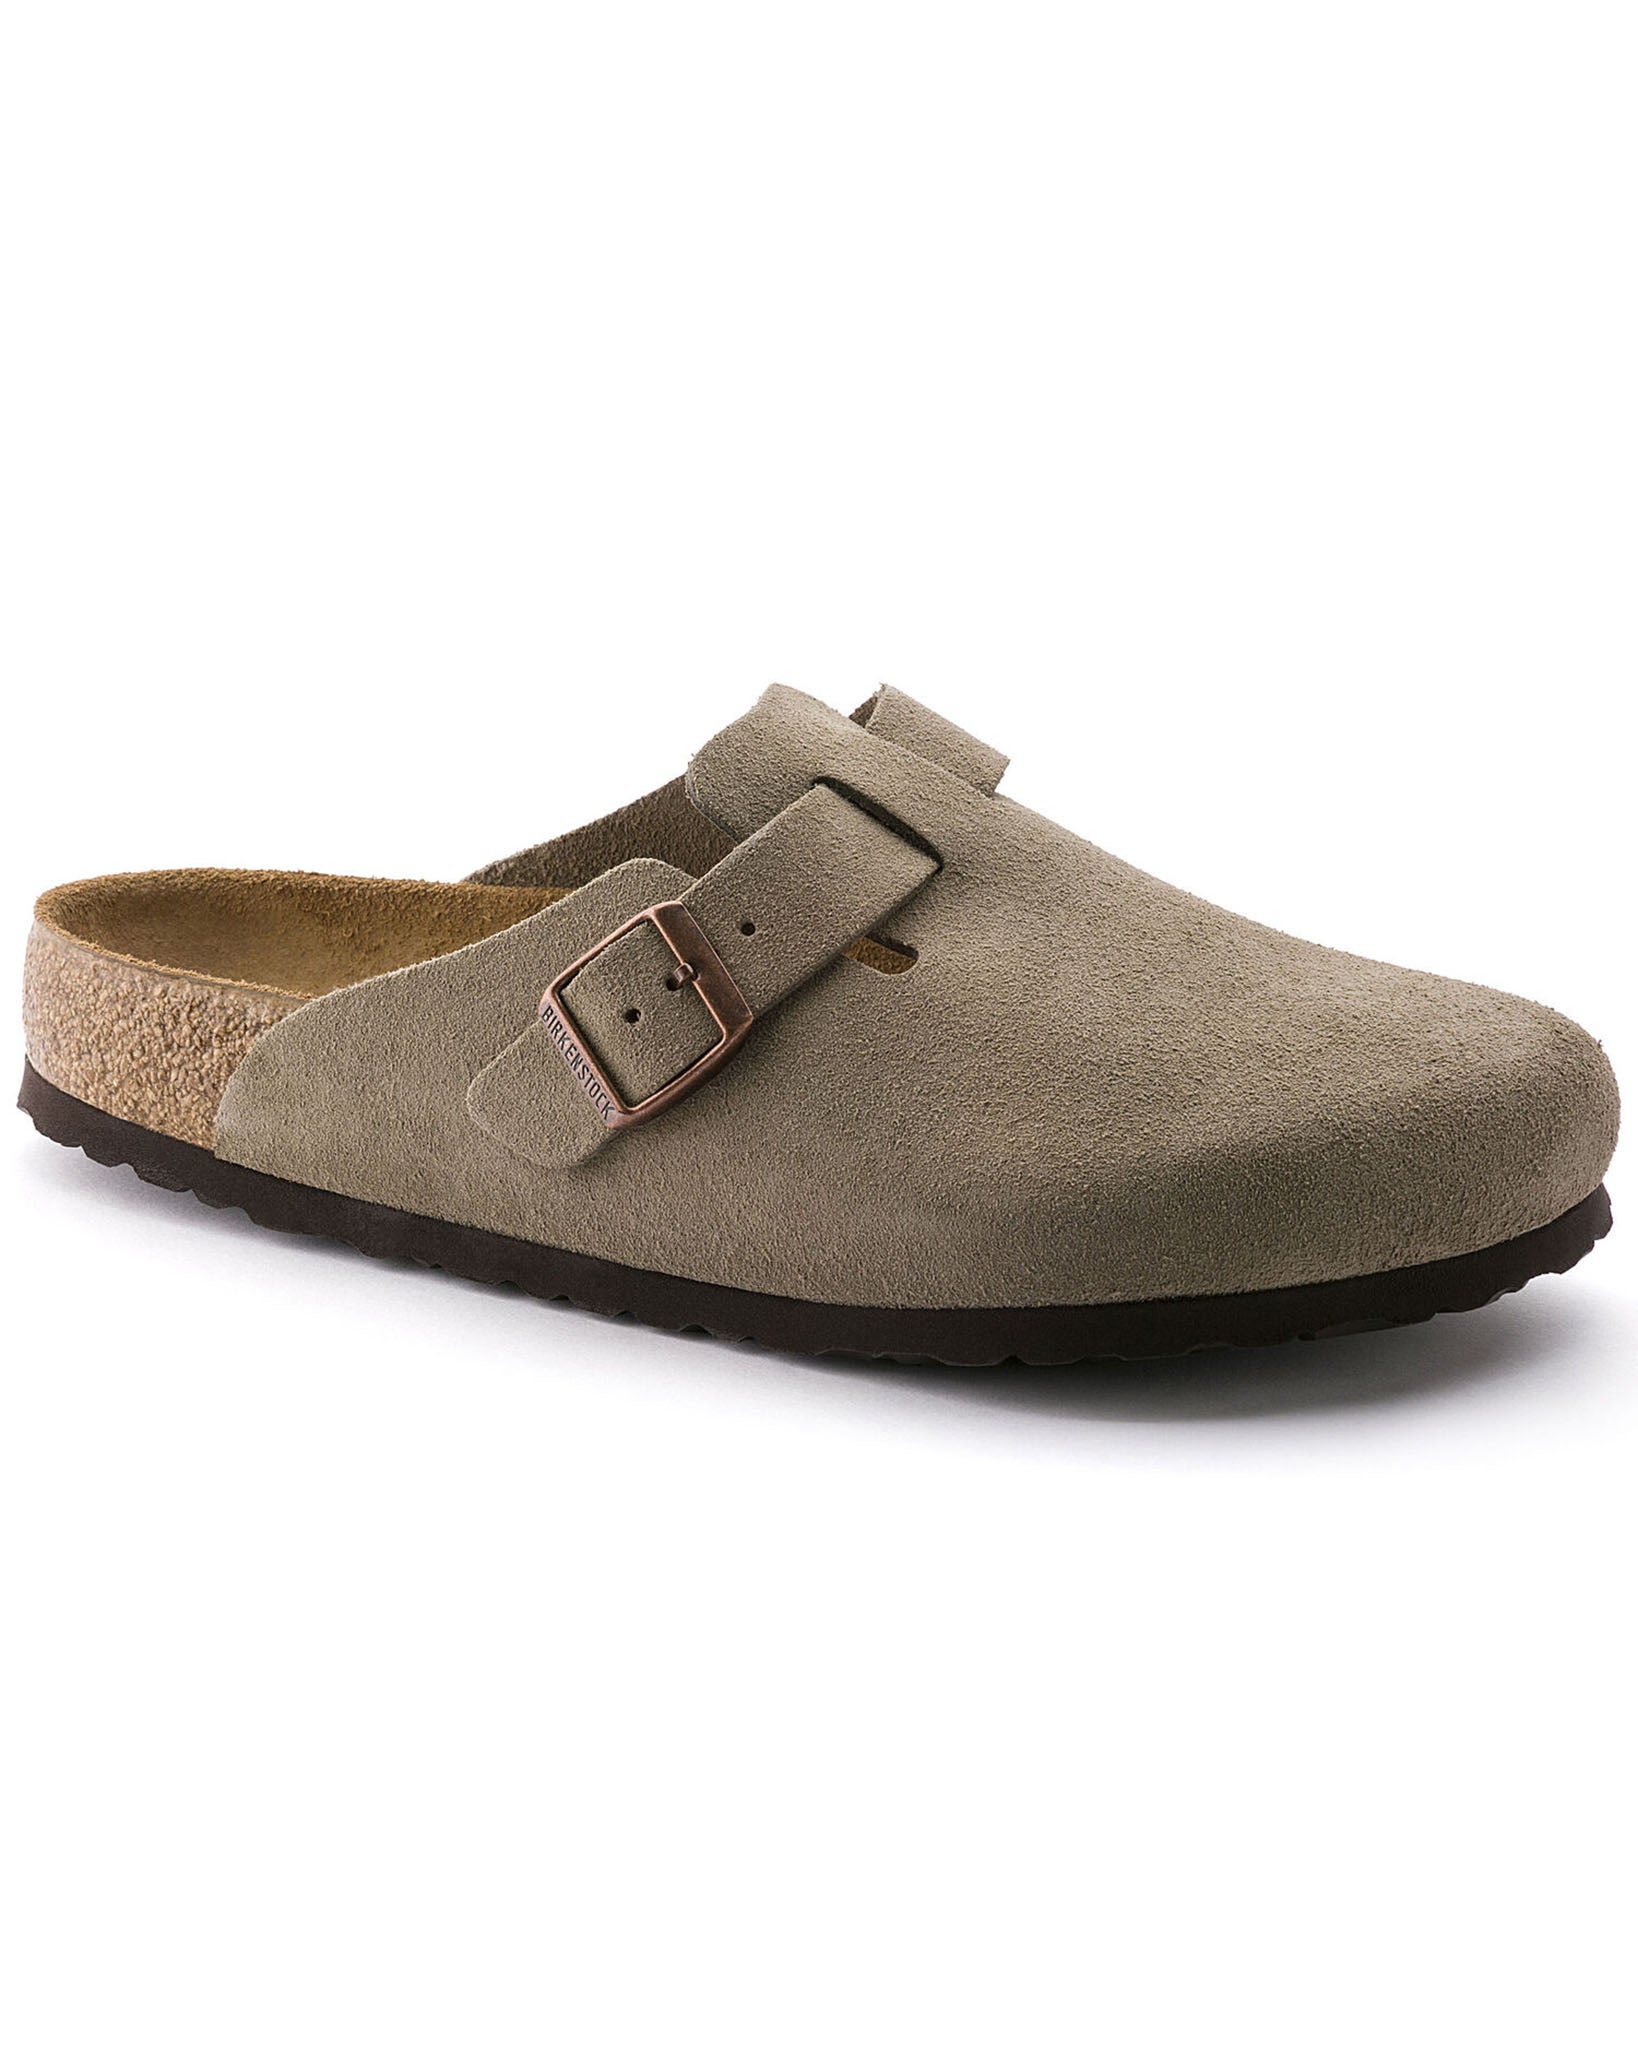 Boston Soft Footbed Taupe Suede Leather Clogs